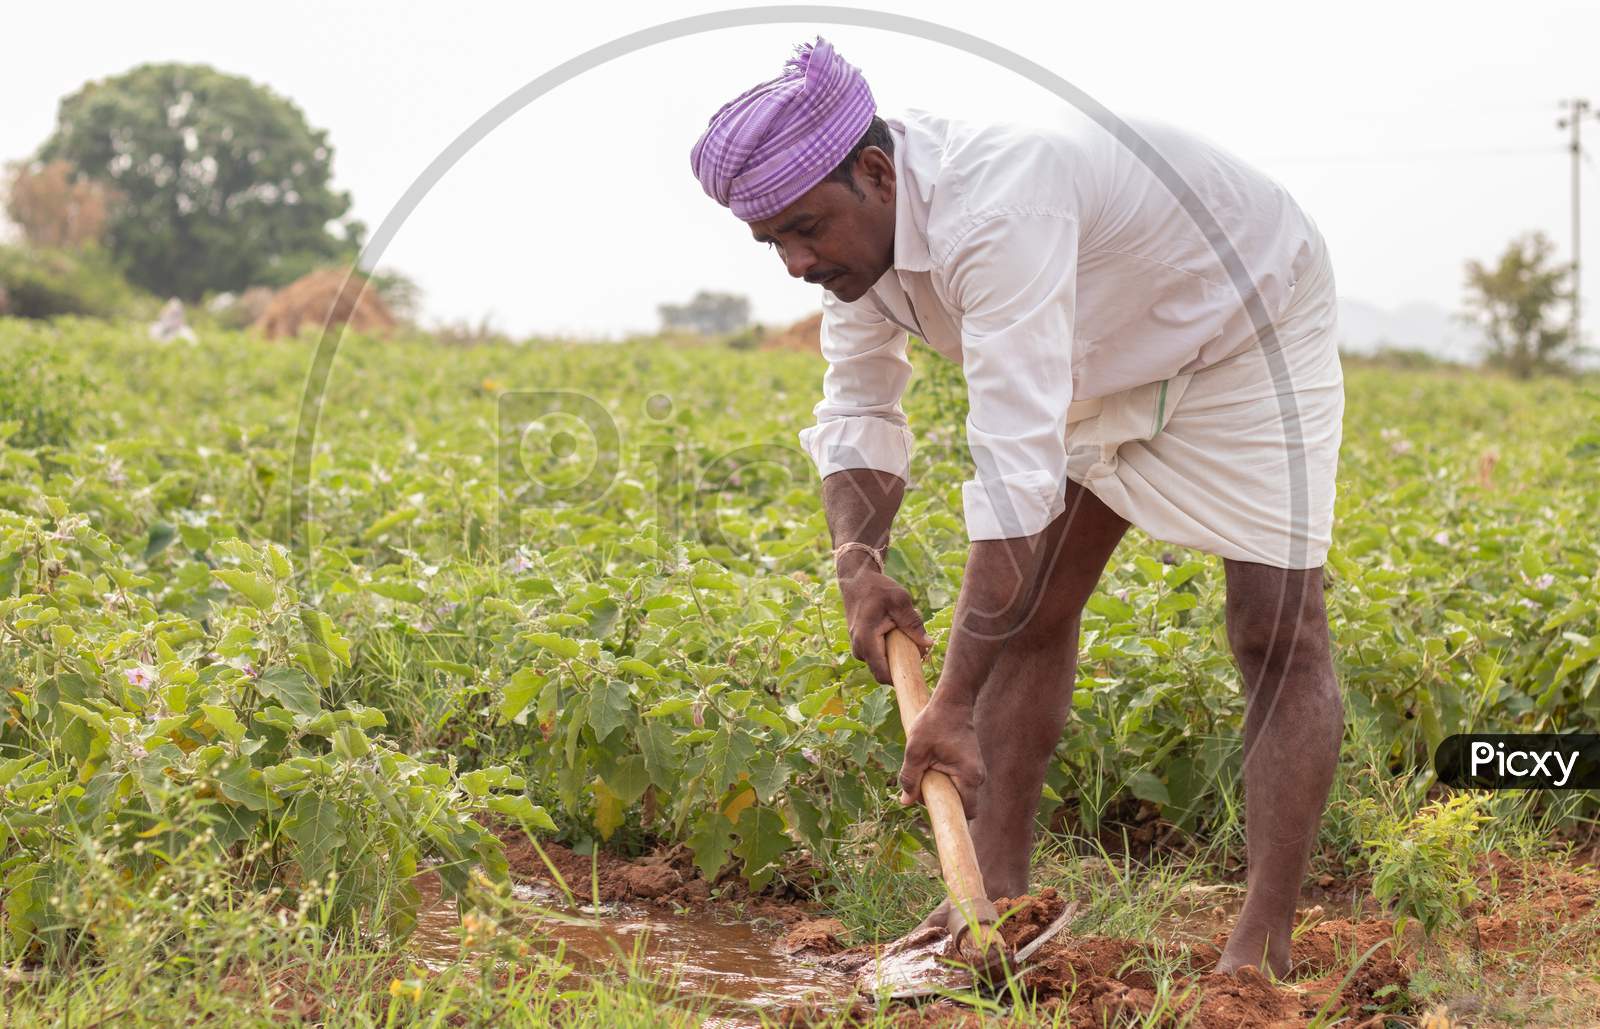 An Indian Farmer working in Agriculture Field